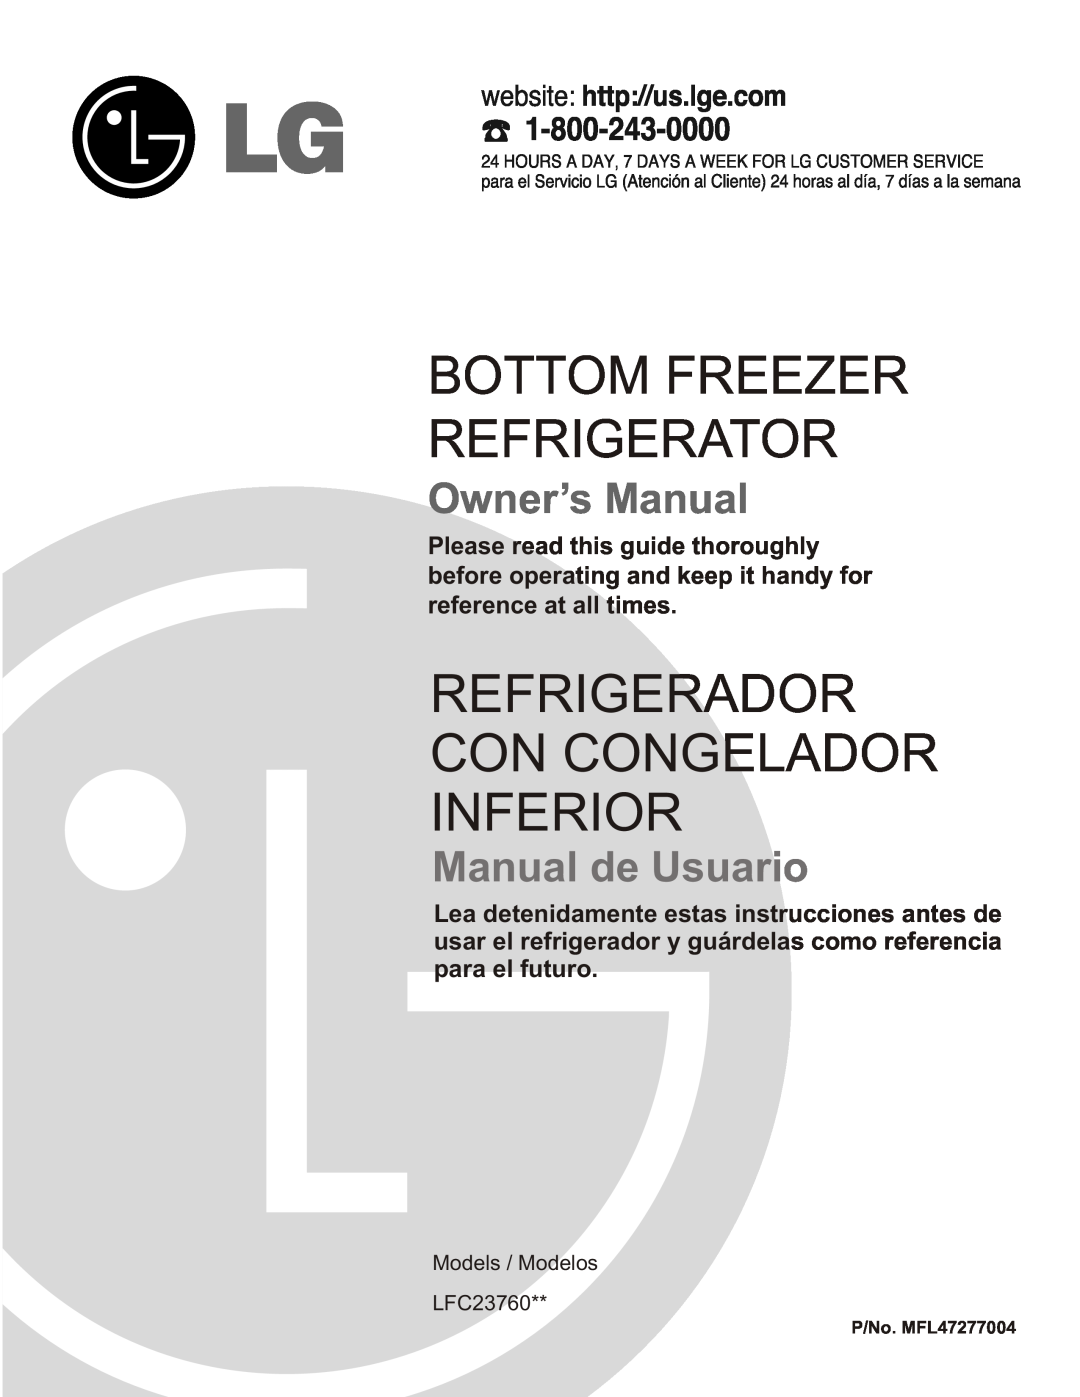 LG Electronics owner manual Please read this guide thoroughly, Models / Modelos LFC23760, Bottom Freezer Refrigerator 